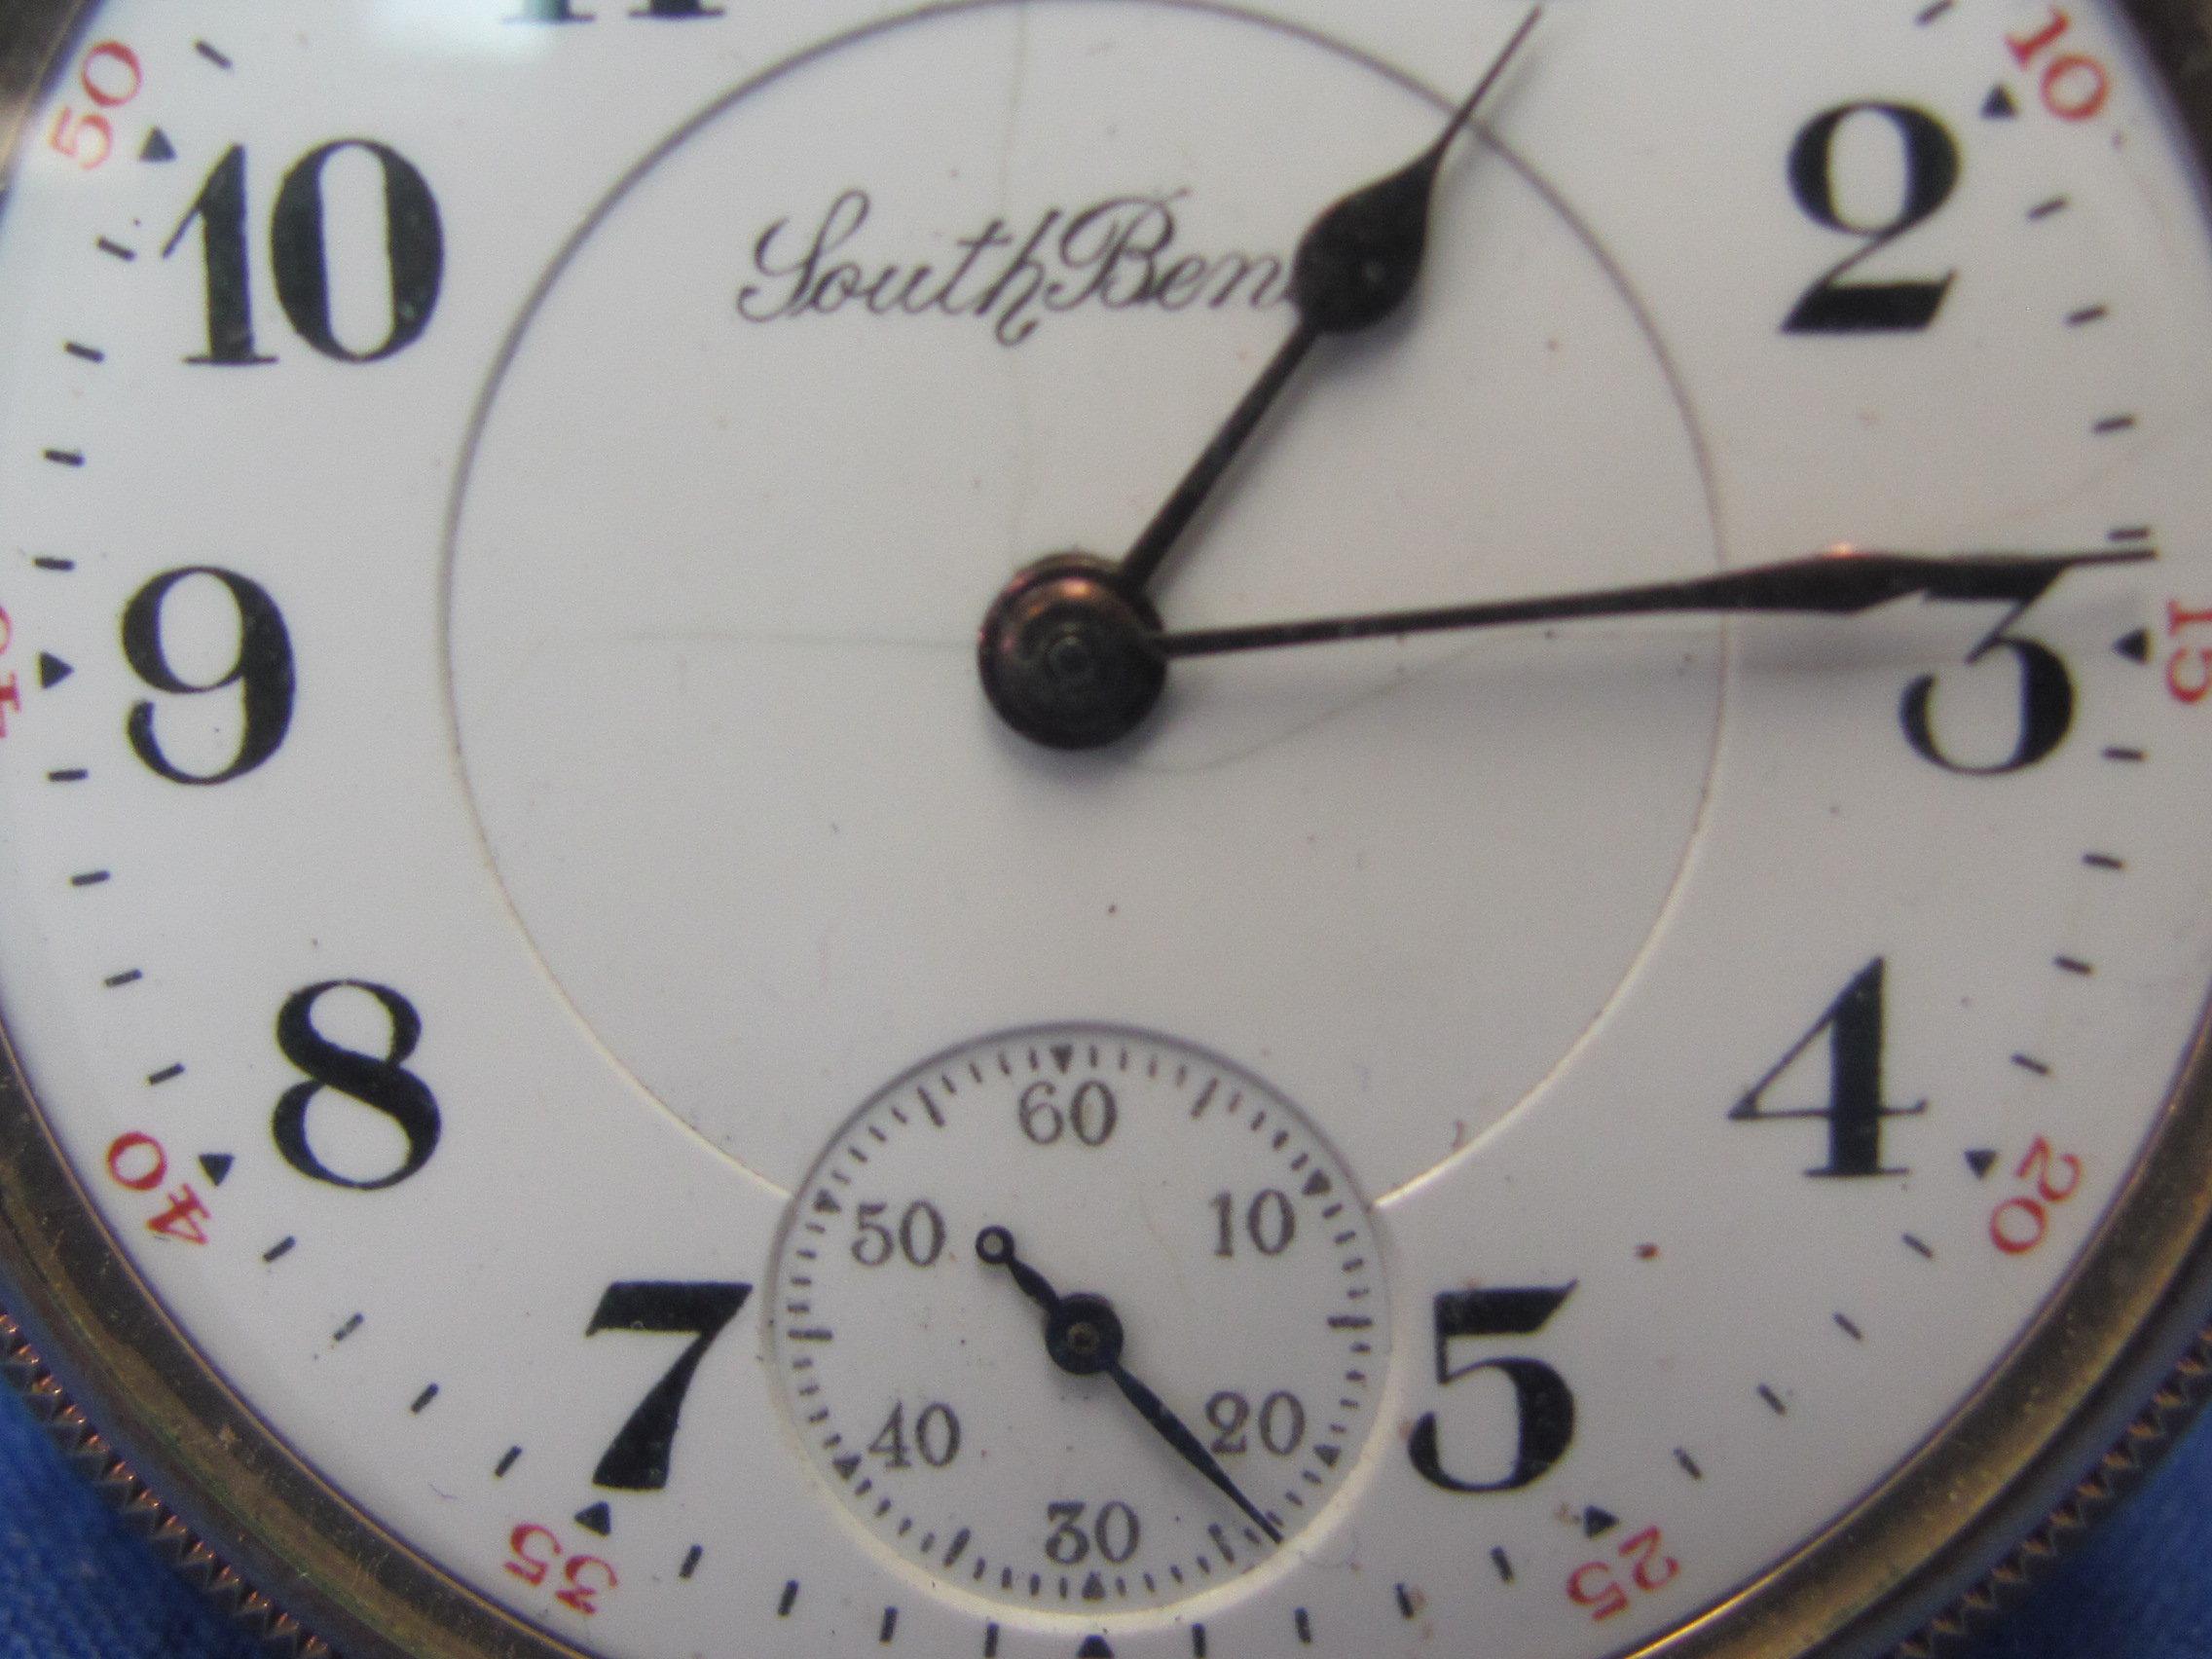 South Bend Pocket Watch “The Studebaker” - Gold Filled – 17 Jewels – Running – 2” in diameter